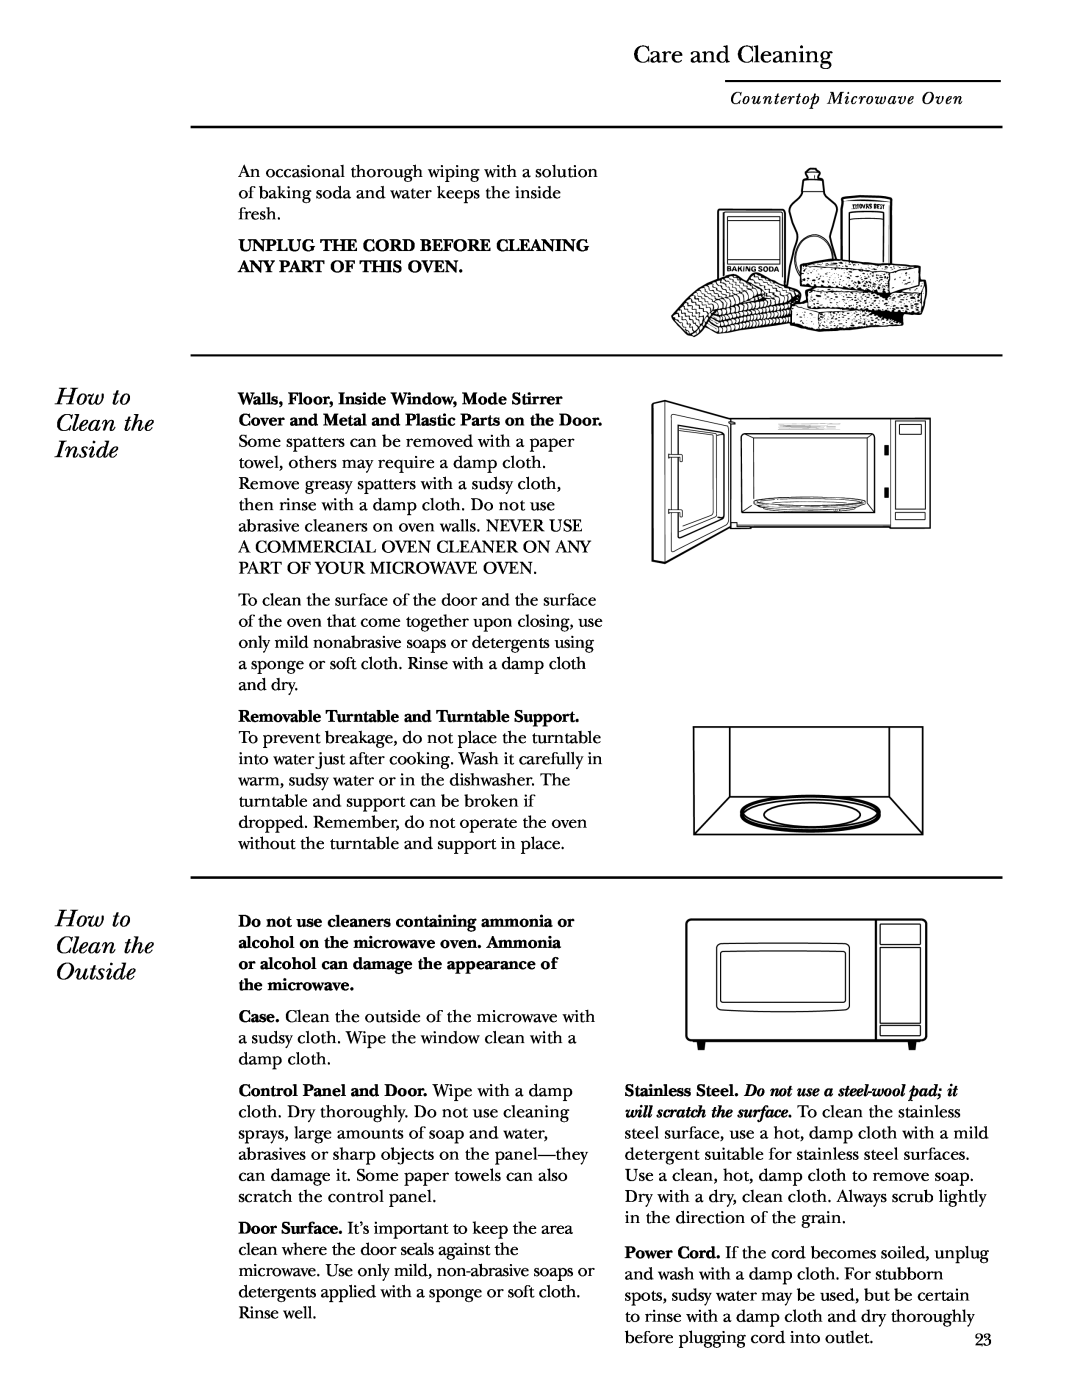 GE ZE2160 owner manual How to Clean the Inside, Care and Cleaning, How to Clean the Outside 